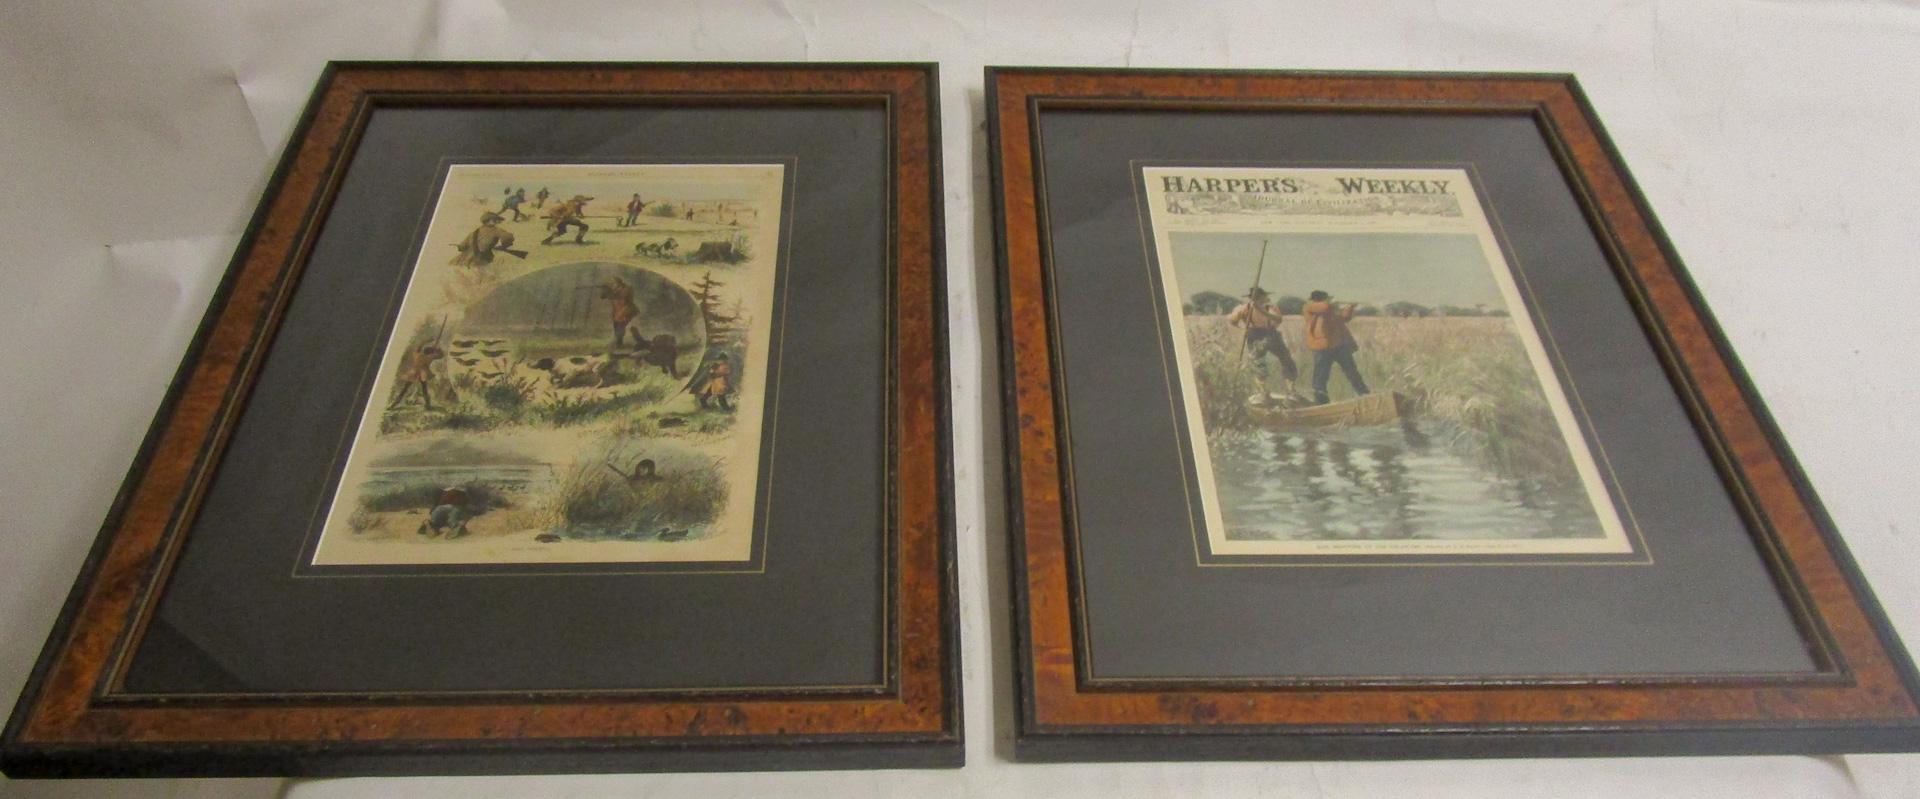 American 19th C Harper's Weekly A.B. Frost Sporting Prints with Burled Walnut Frames